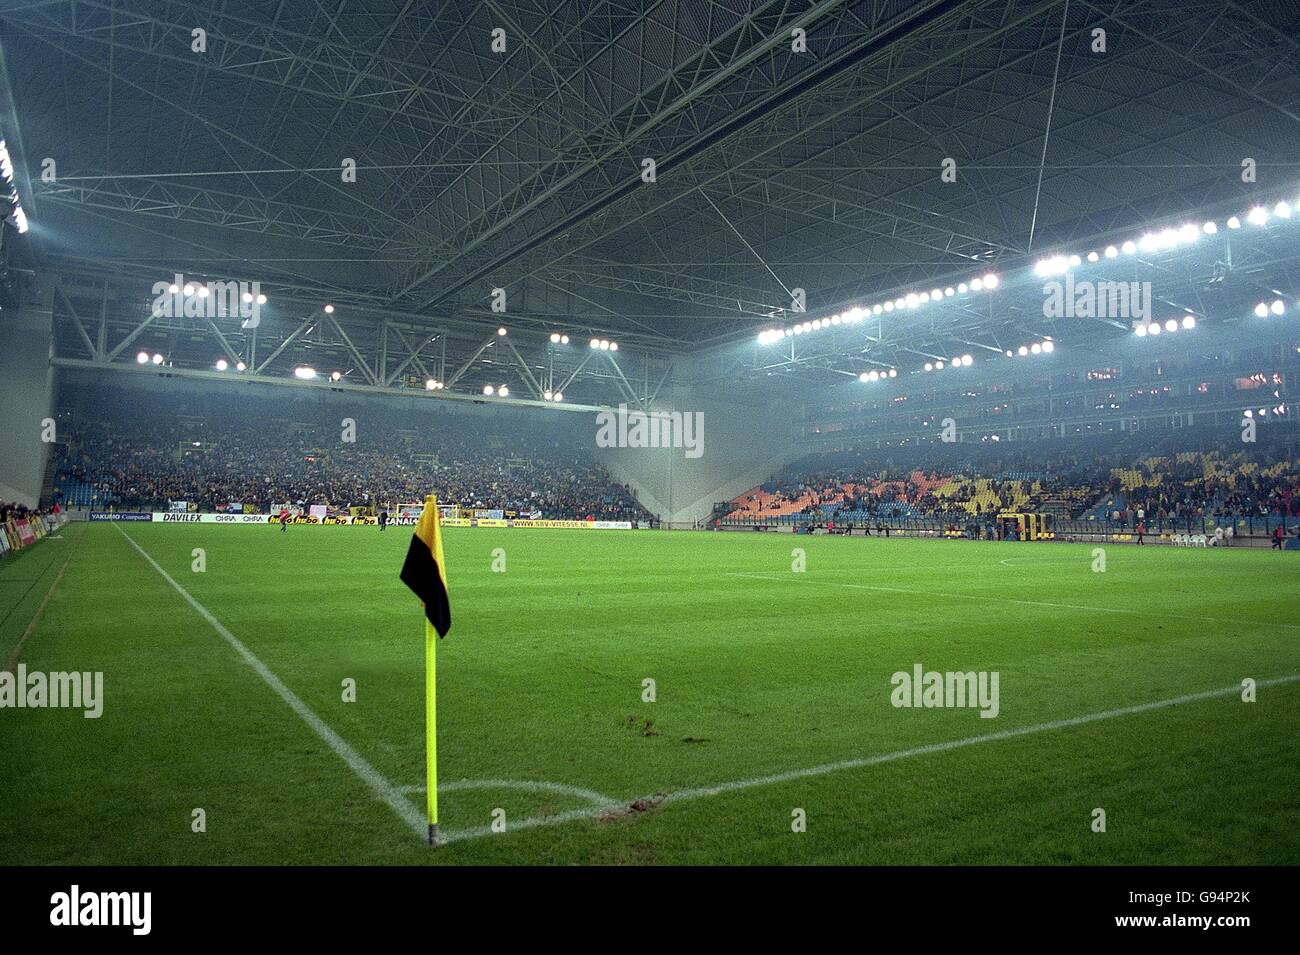 General view of the Gelre Dome, home of Vitesse Arnhem The Gelre Dome, Stadium home of Vitesse Arnhem Gelredome Stock Photo